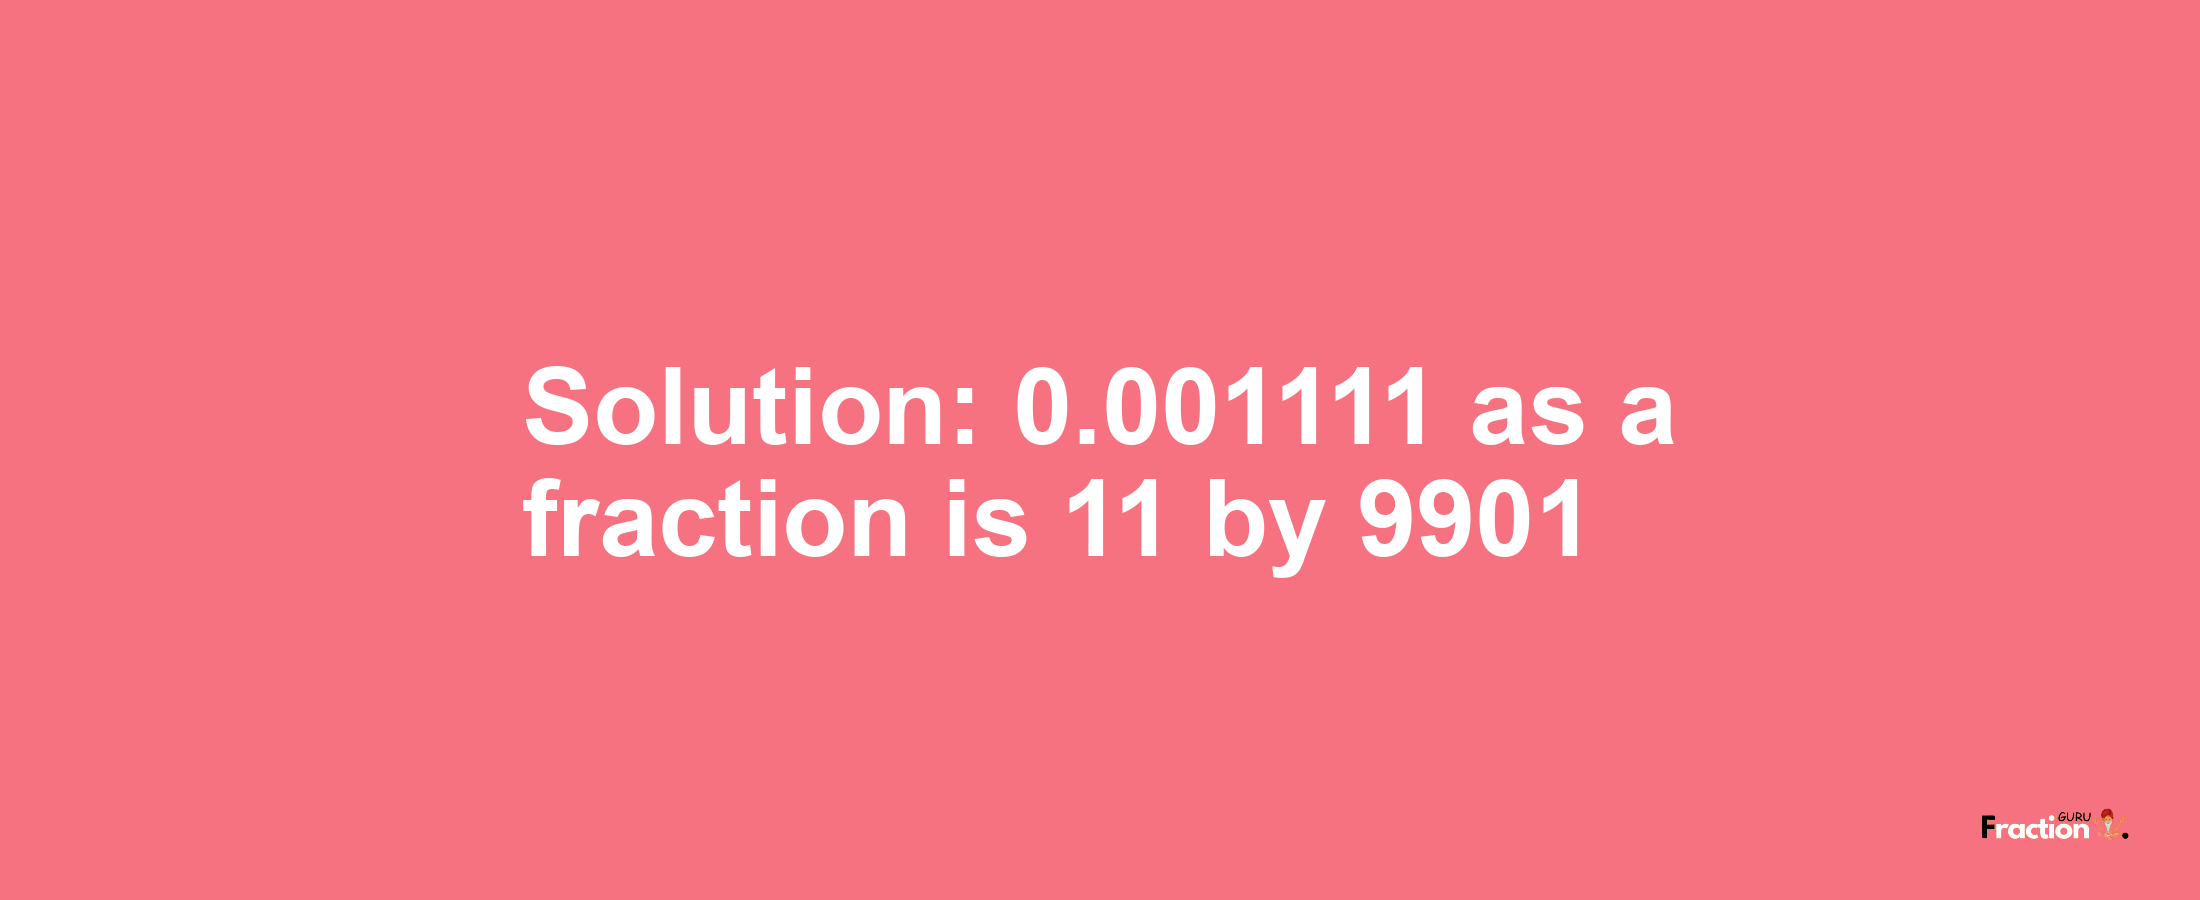 Solution:0.001111 as a fraction is 11/9901